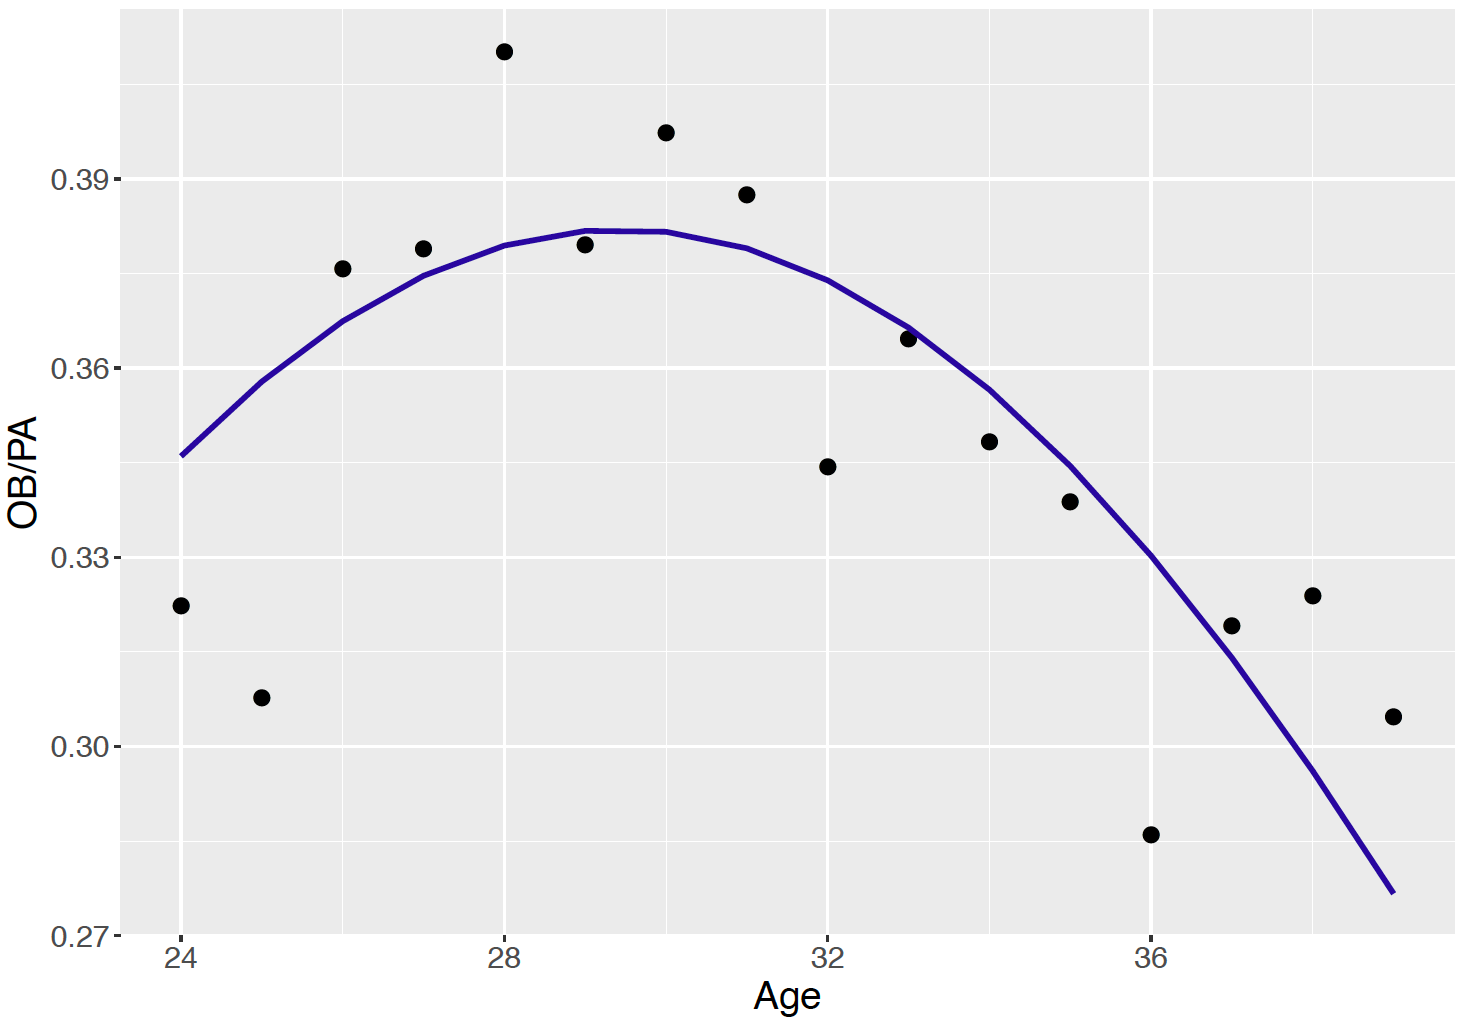 Career trajectory of Chase Utley's on-base percentages.  A quadratic smoothing curve is added to the plot.